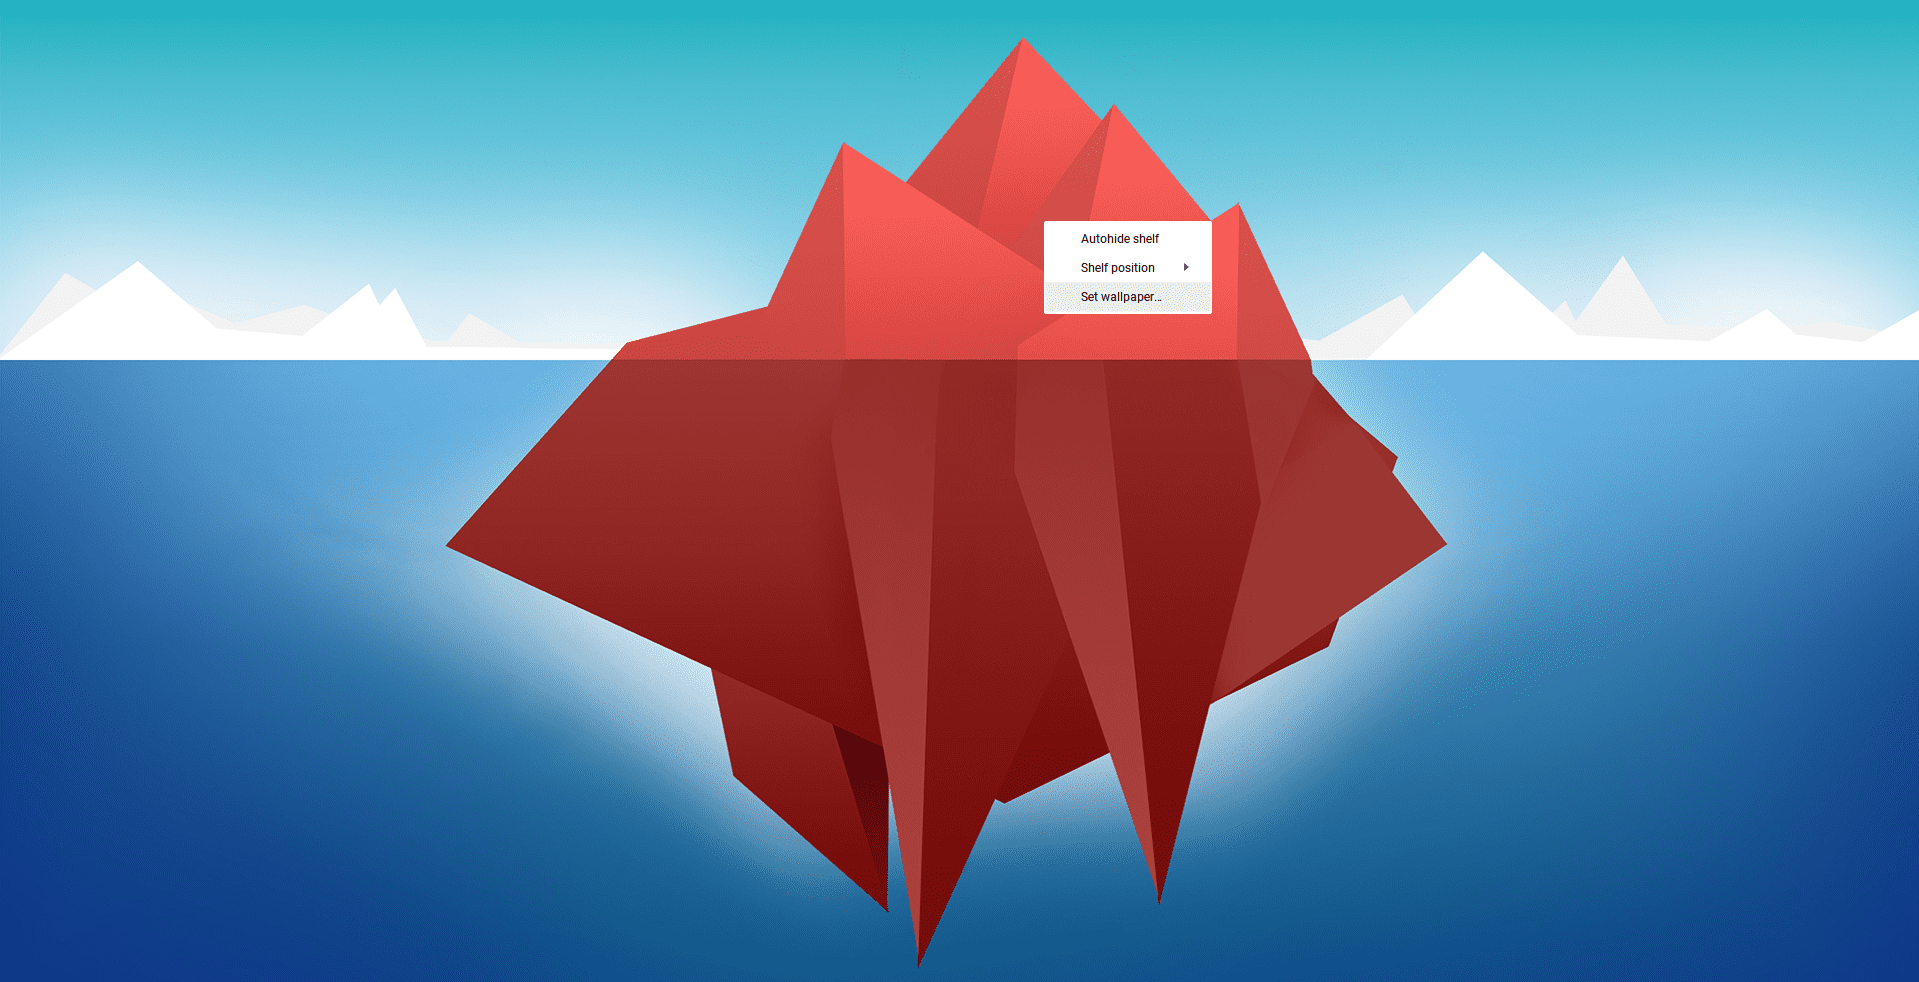 An iceberg with a portion labeled 